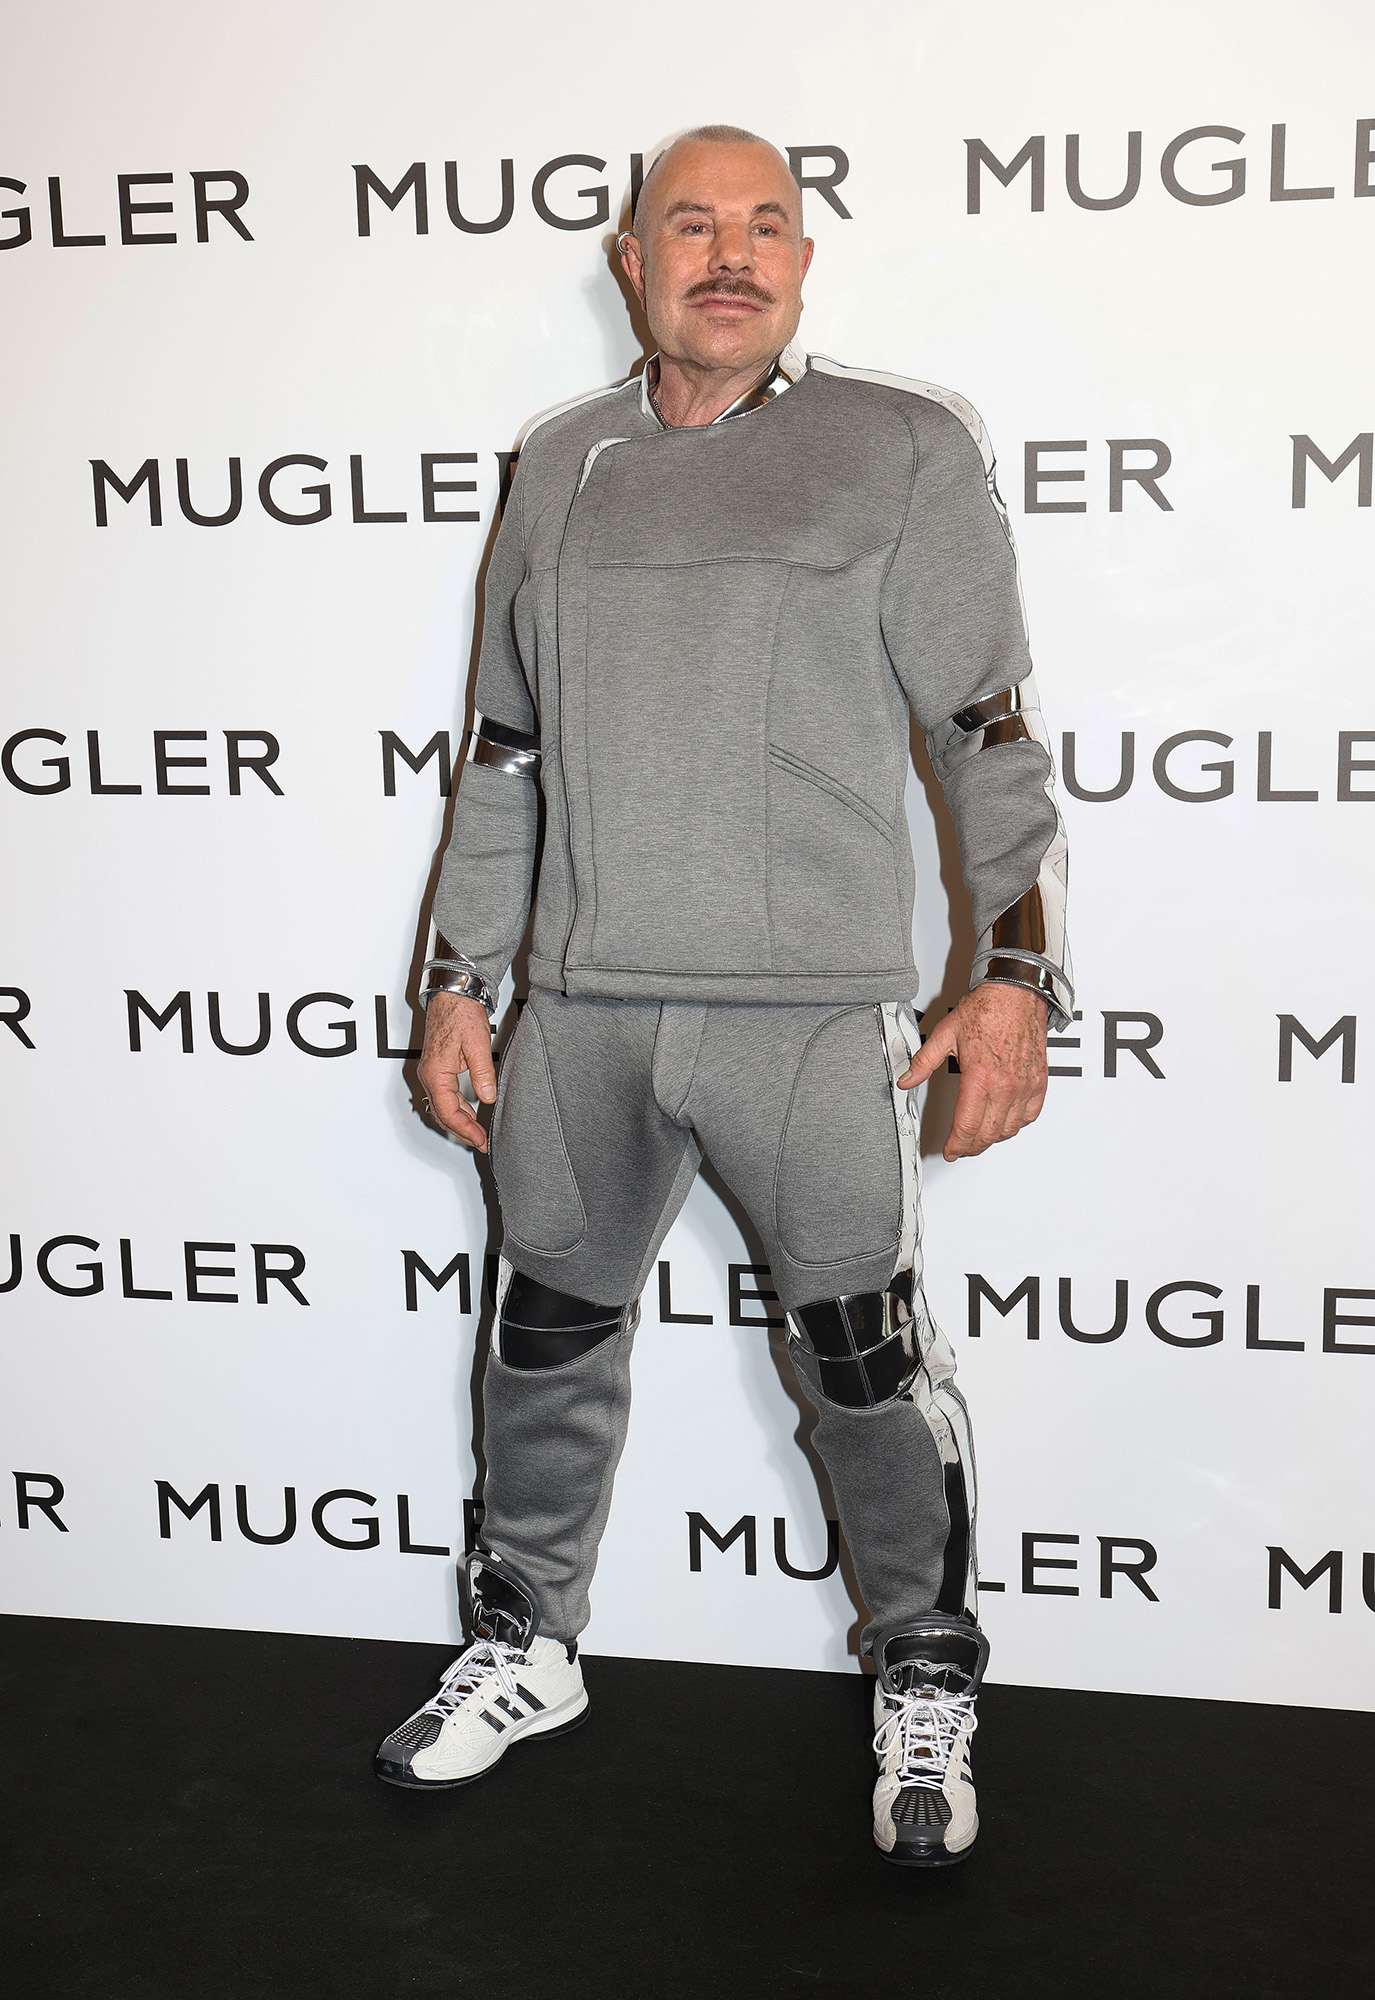 https://www.usmagazine.com/wp-content/uploads/2022/01/Manfred-Thierry-Mugler-Dead-at-Age-73.jpg?quality=55&strip=all